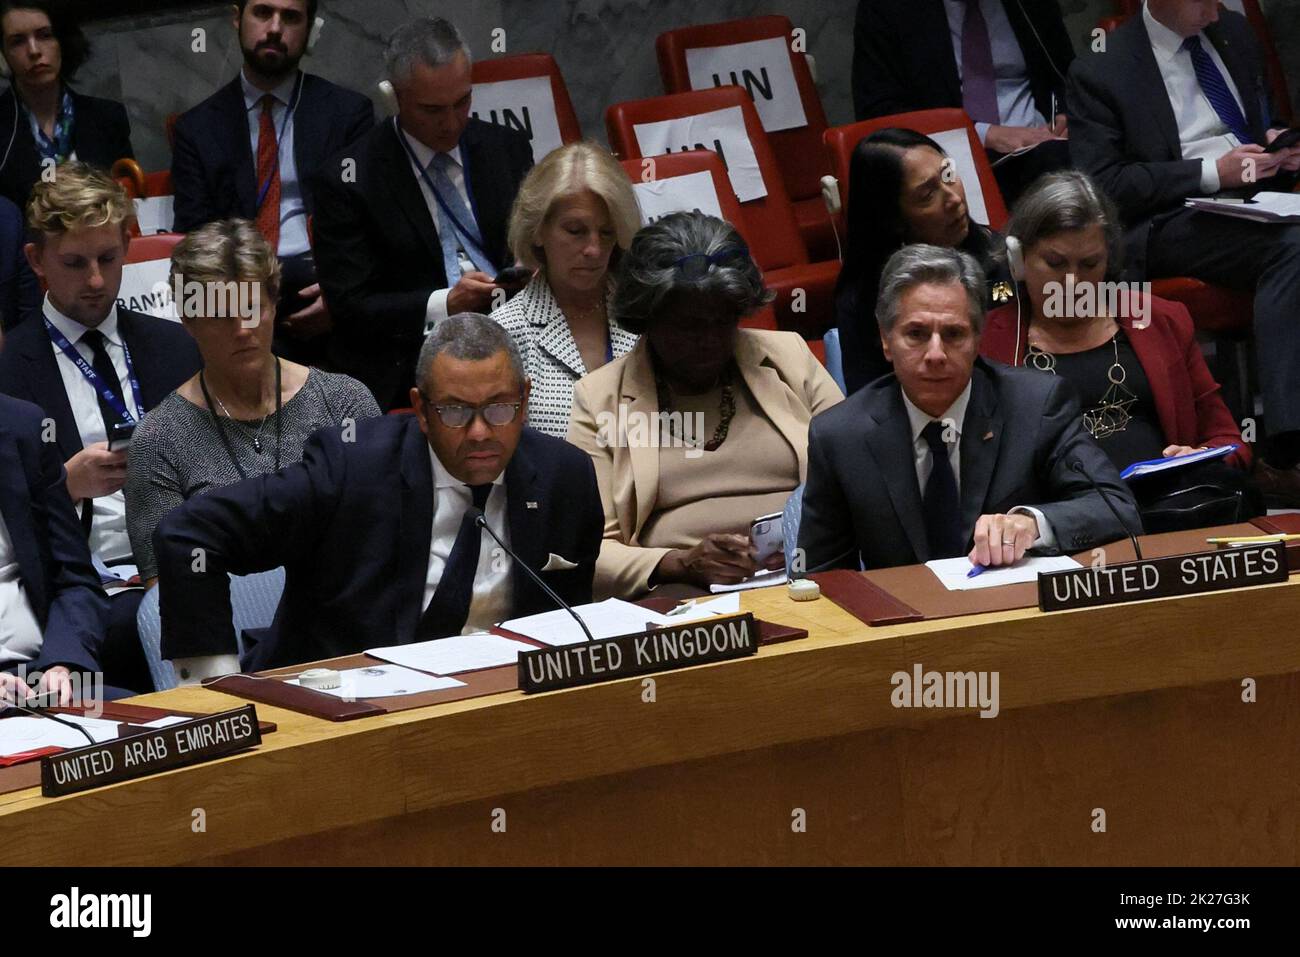 Britain's Foreign Secretary James Cleverly and U.S. Secretary of State Antony Blinken listen during a high level meeting of the United Nations Security Council on the situation amid Russia's invasion of Ukraine, at the 77th Session of the United Nations General Assembly at U.N. Headquarters in New York City, U.S., September 22, 2022. REUTERS/Brendan McDermid Stock Photo